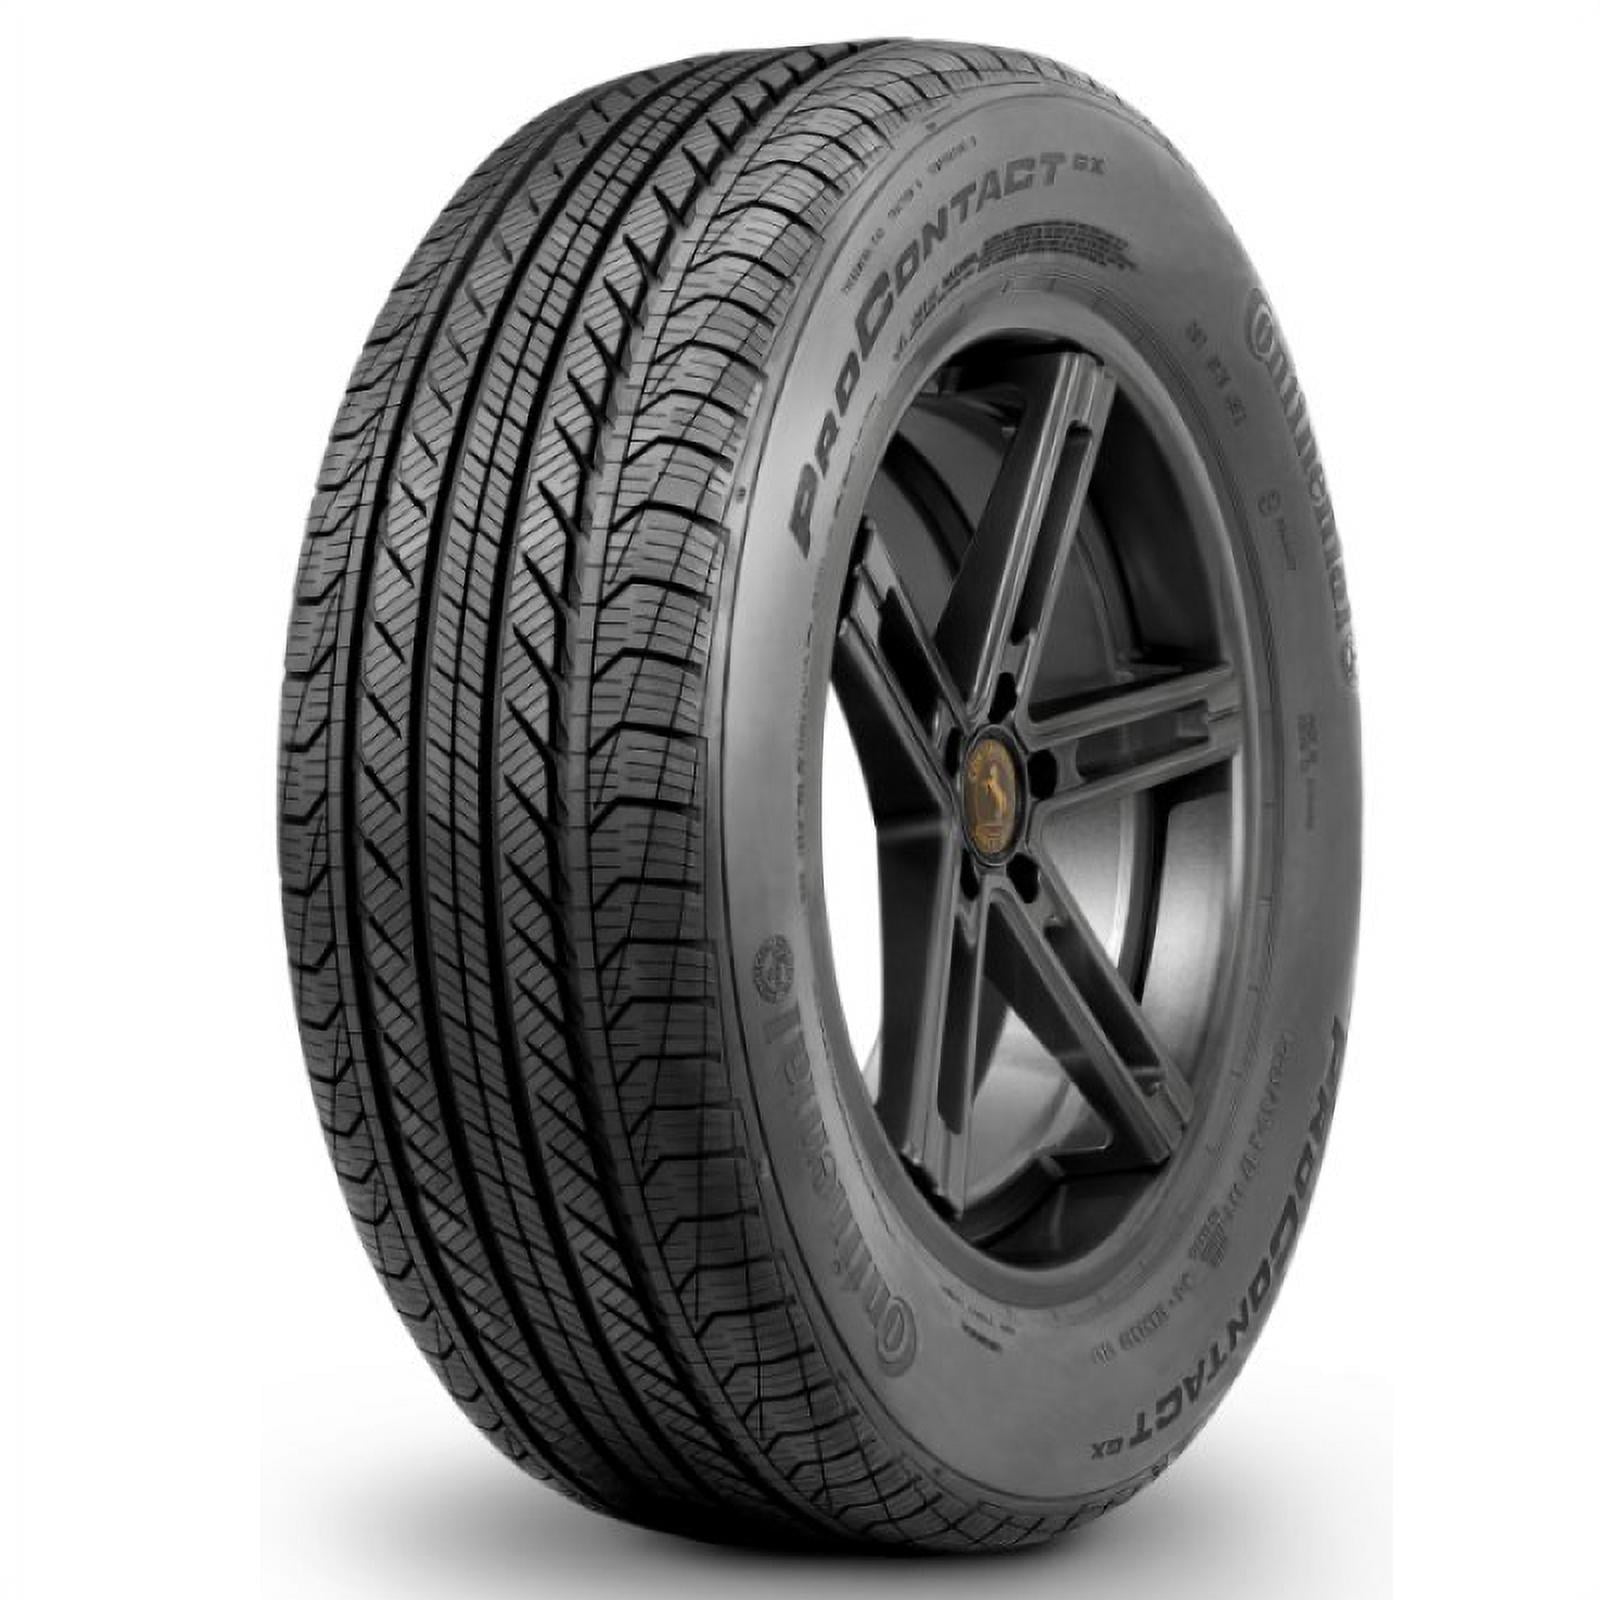 1 NEW 225/50-17 CONTINENTAL TOURING CONTACT CV95 50R R17 TIRE 